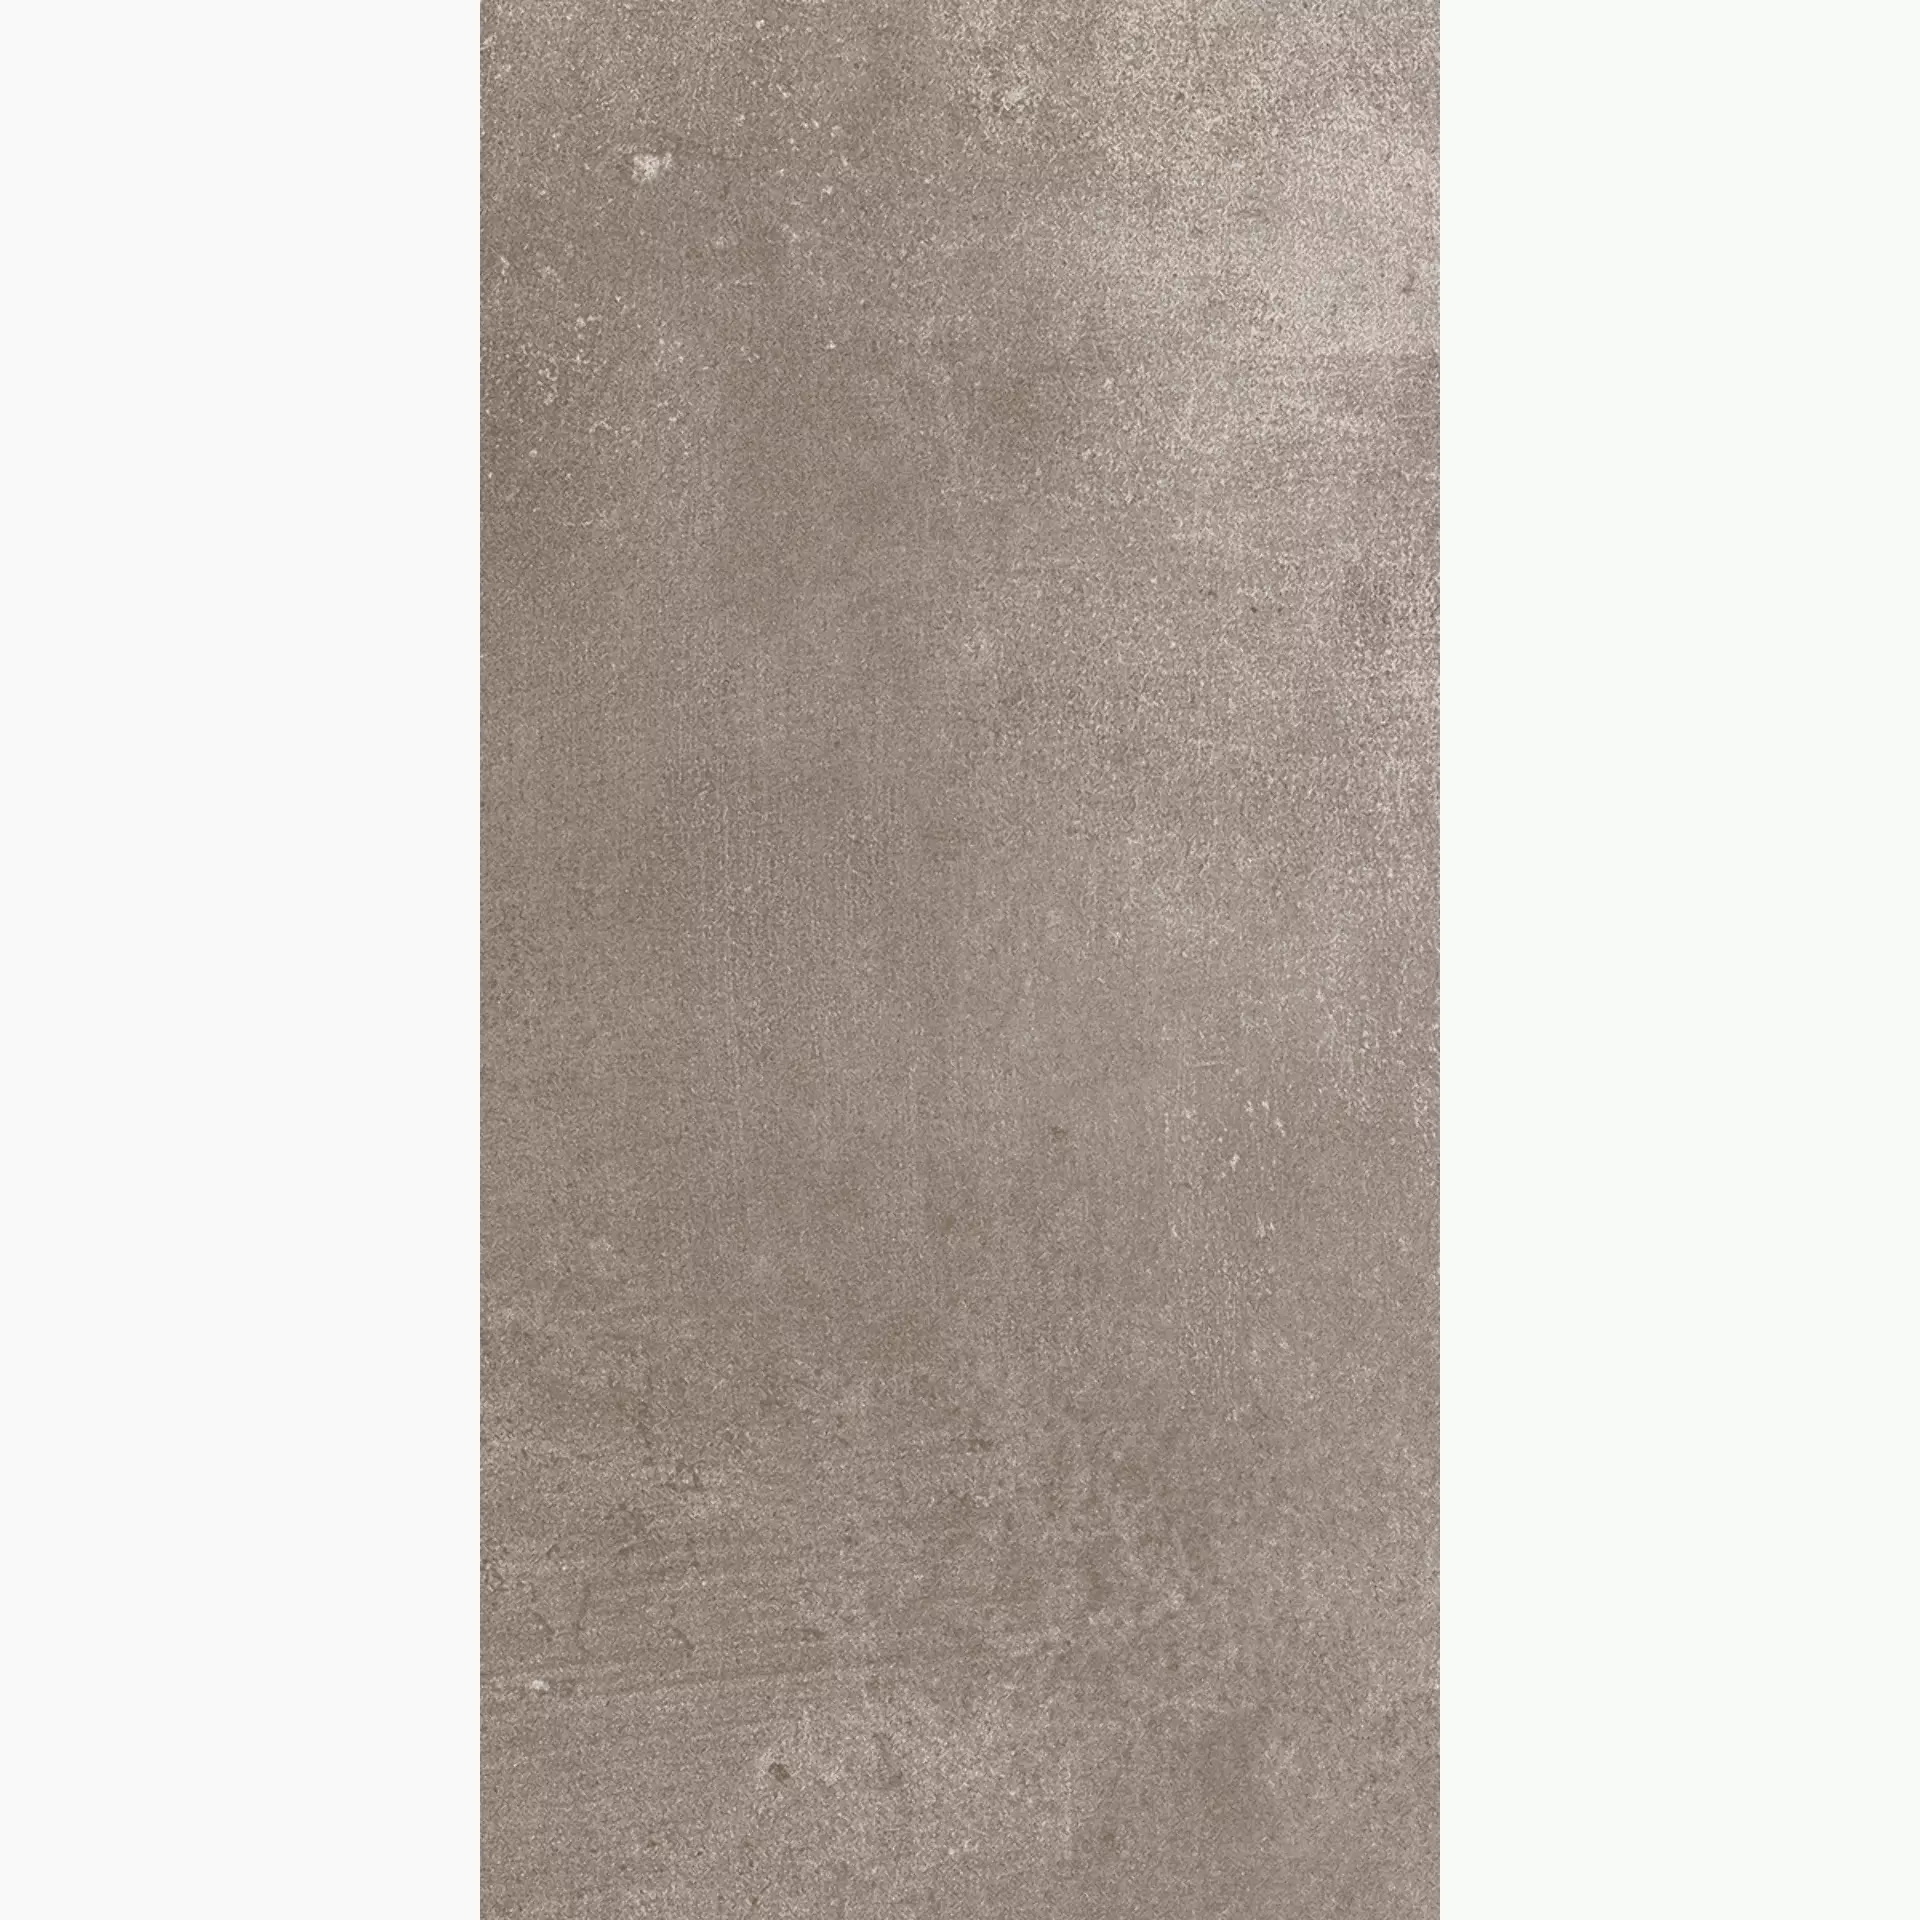 Rondine Volcano Taupe Naturale J86691 30,5x60,5cm 8,5mm